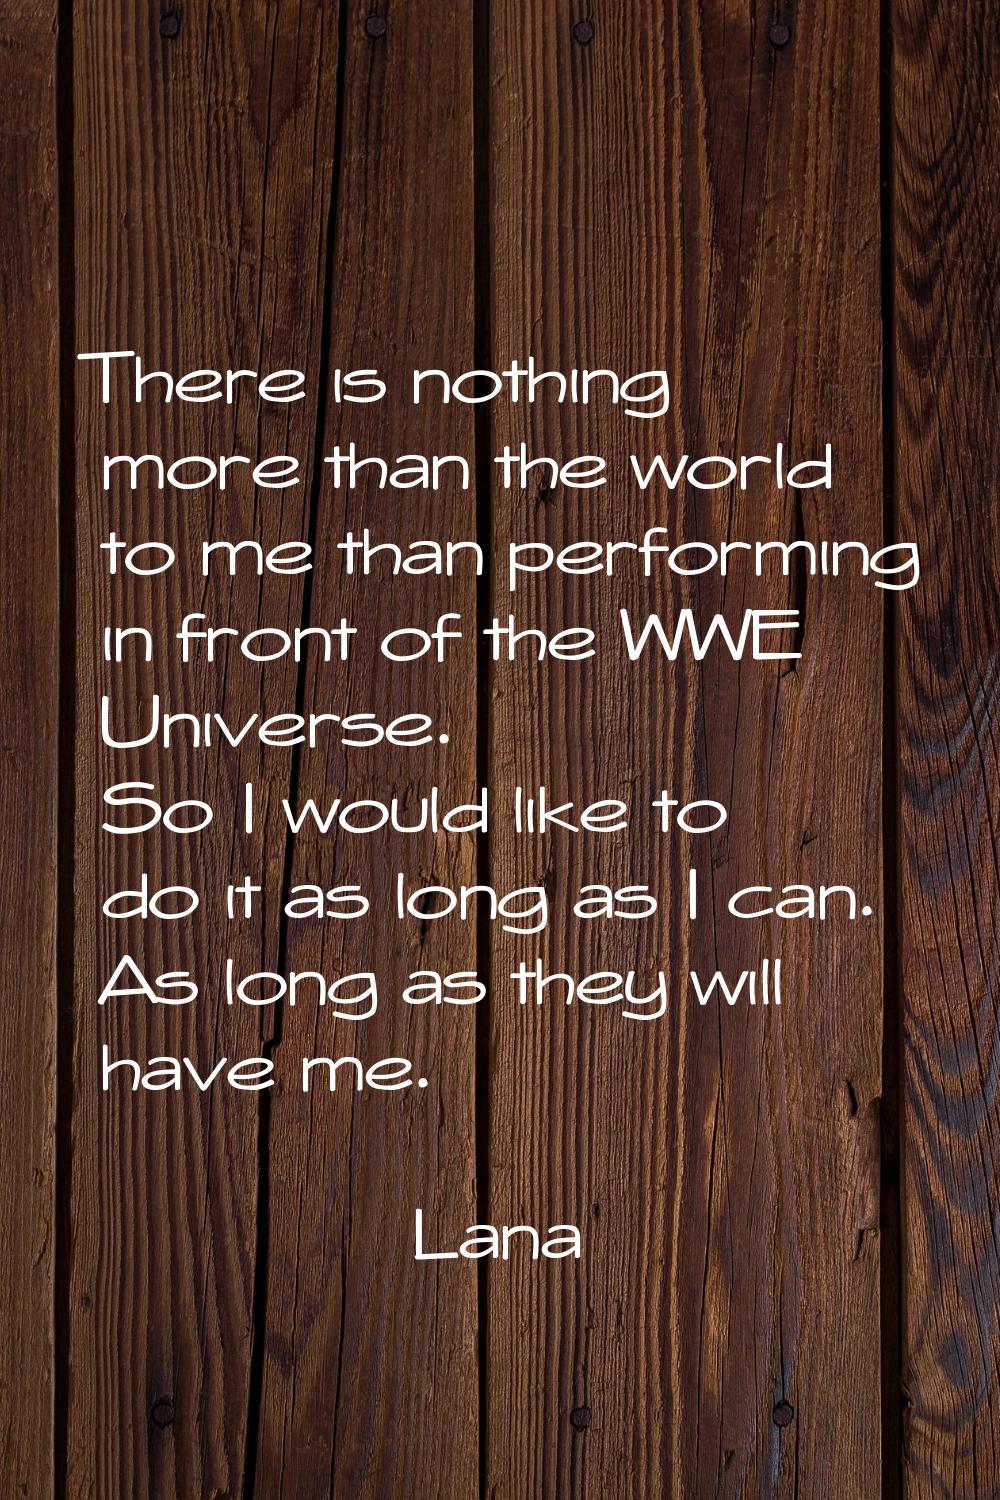 There is nothing more than the world to me than performing in front of the WWE Universe. So I would